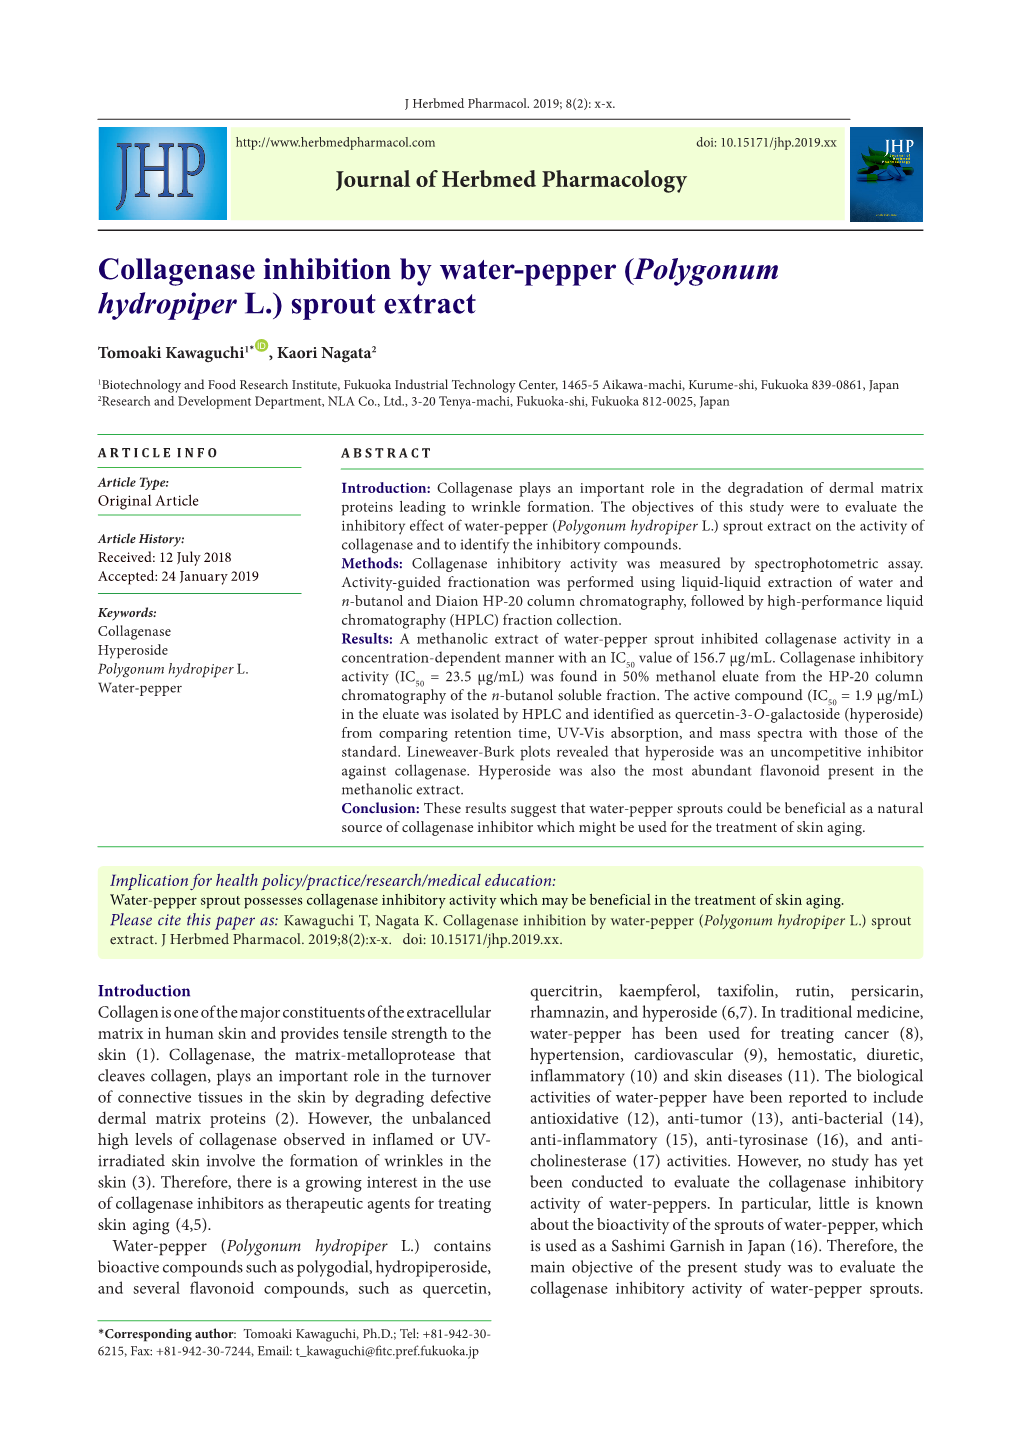 Collagenase Inhibition by Water-Pepper (Polygonum Hydropiper L.) Sprout Extract